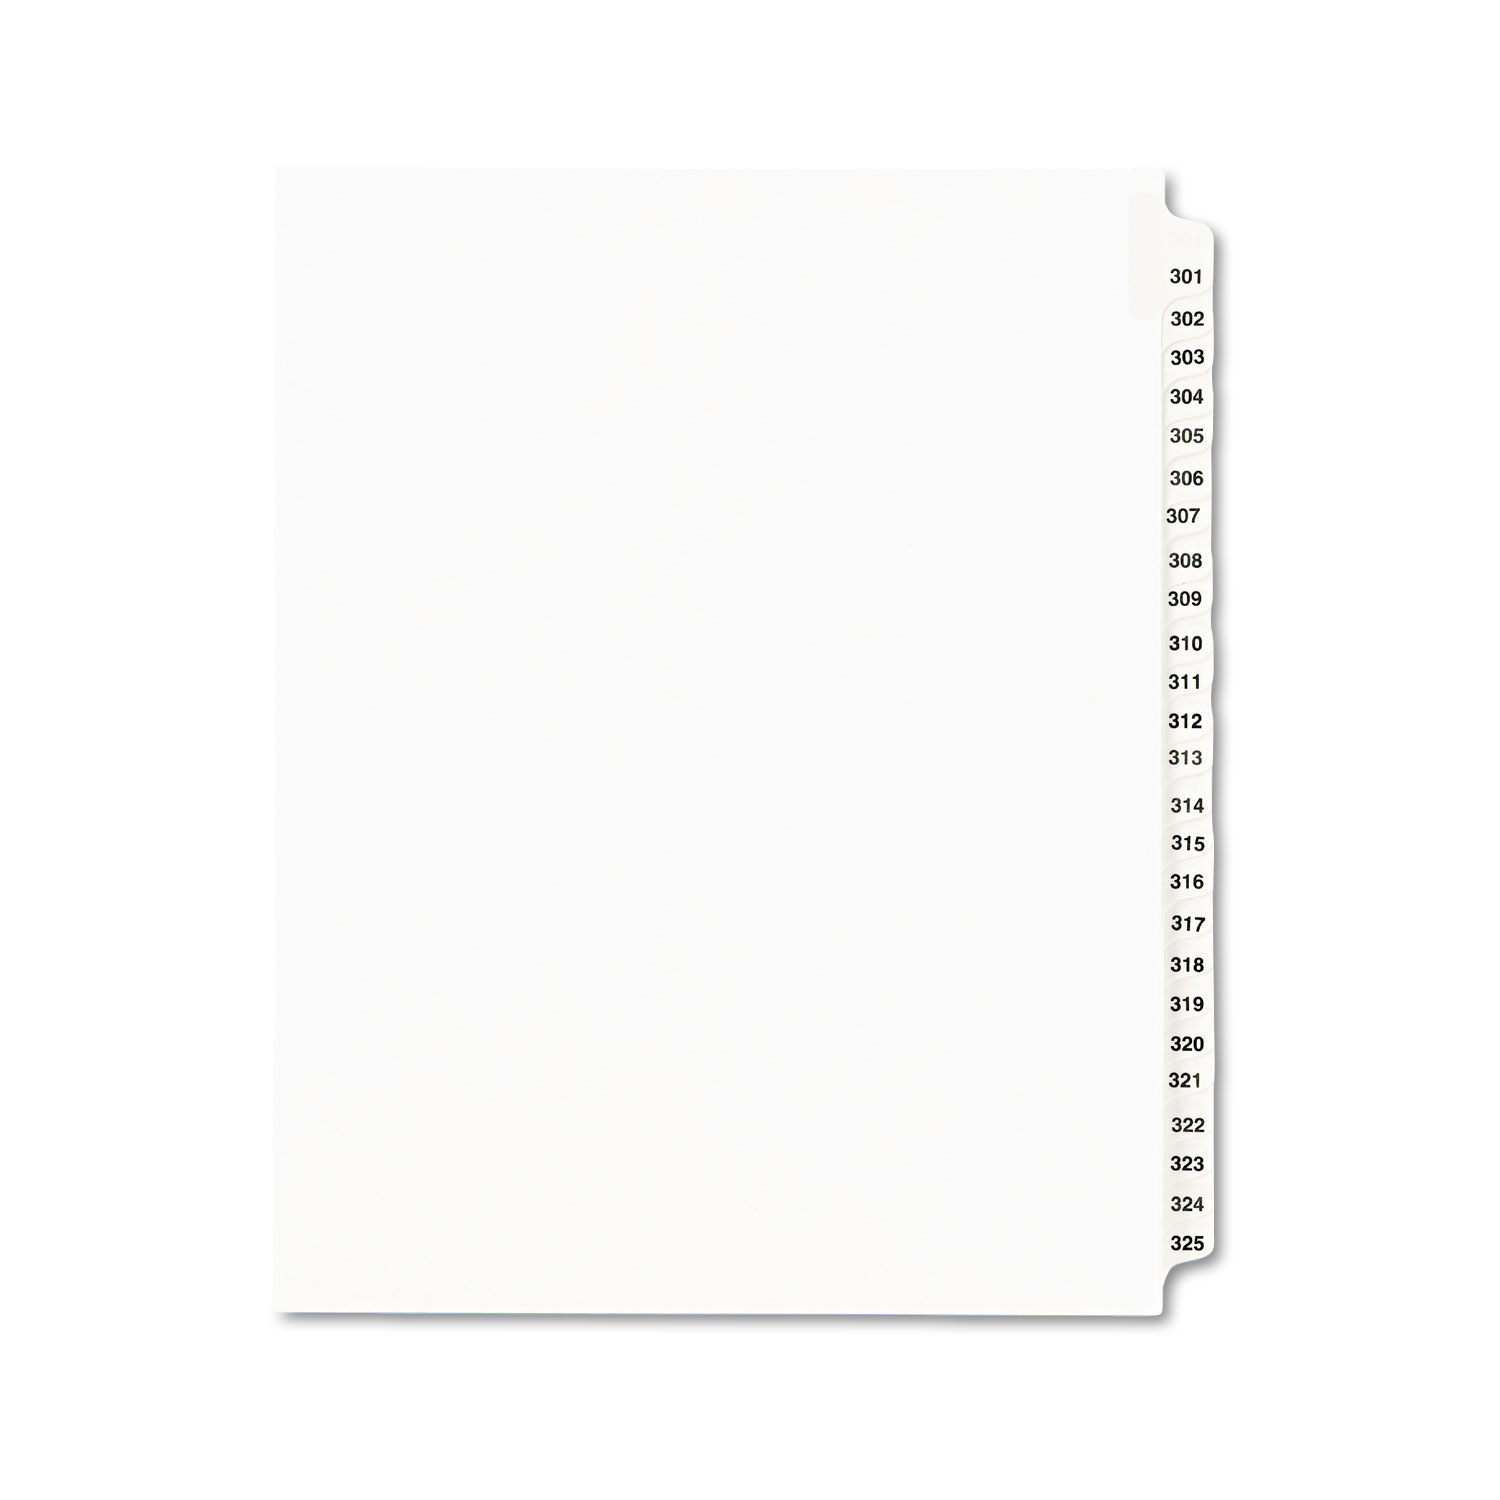  Avery 01342 Preprinted Legal Exhibit Side Tab Index Dividers, Avery Style, 25-Tab, 301 to 325, 11 x 8.5, White, 1 Set (AVE01342) 